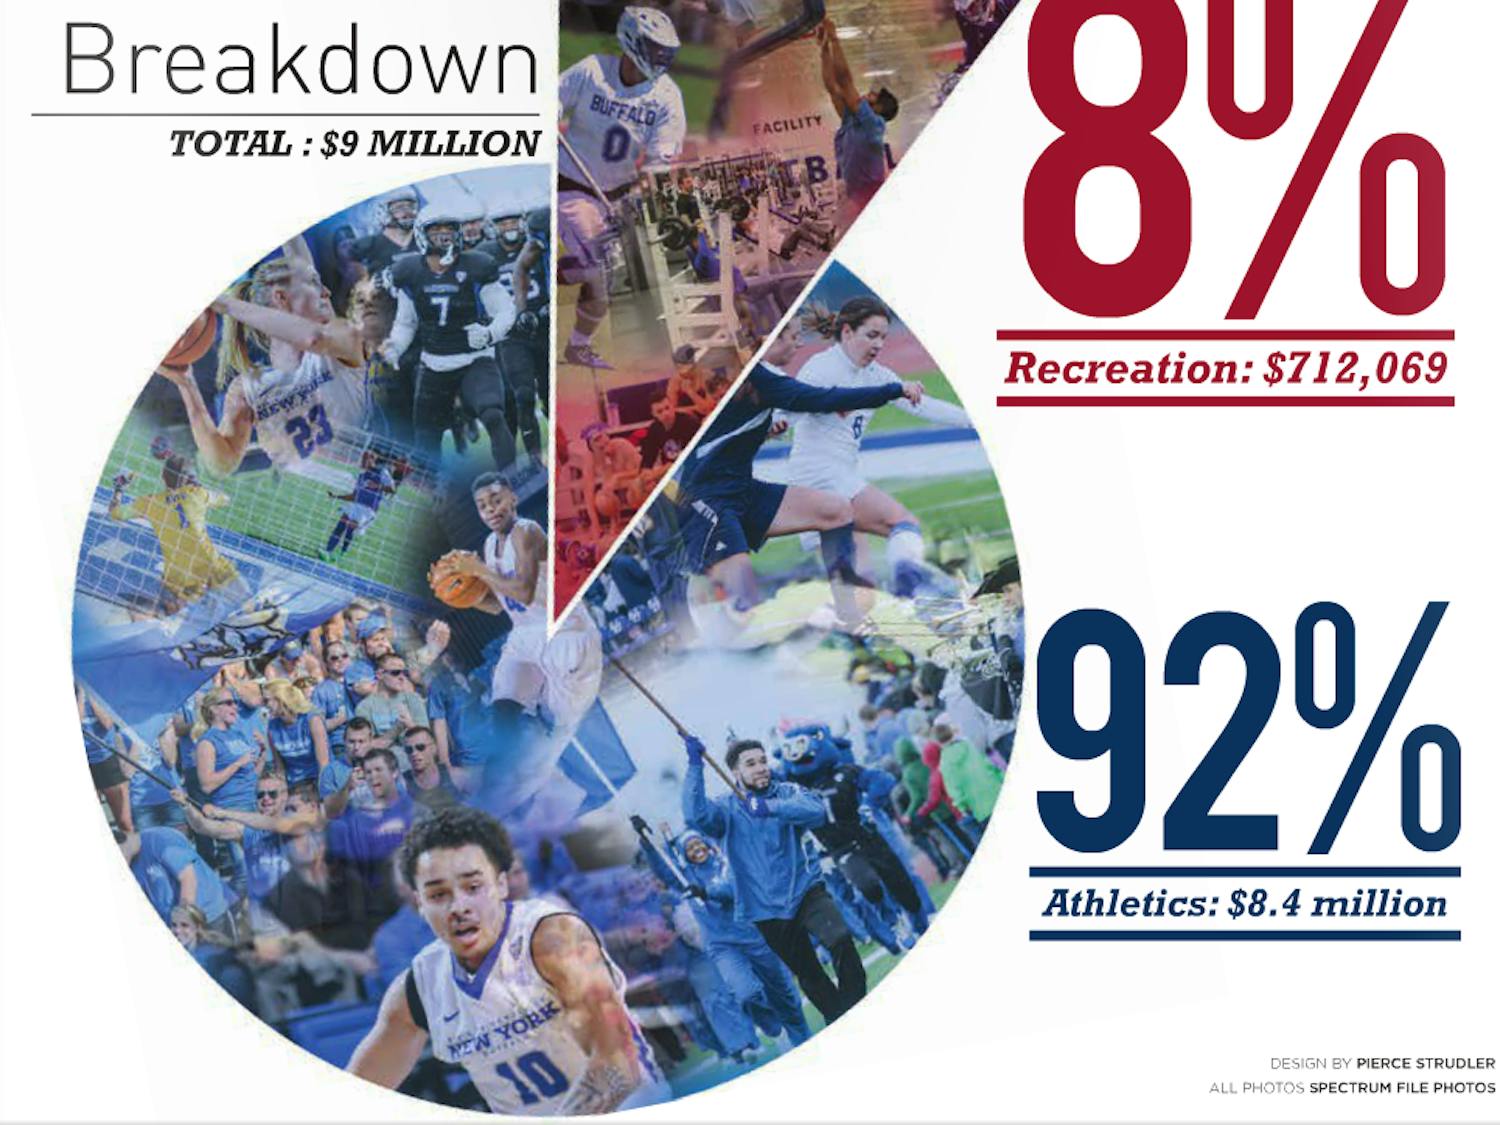 Of the roughly $9 million UB Athletics collects from a student athletic fee, 92 percent goes toward servicing the Division I varsity programs and its 535 student-athletes, and just 8 percent goes toward servicing the recreation services available to all 30,000 students.&nbsp;